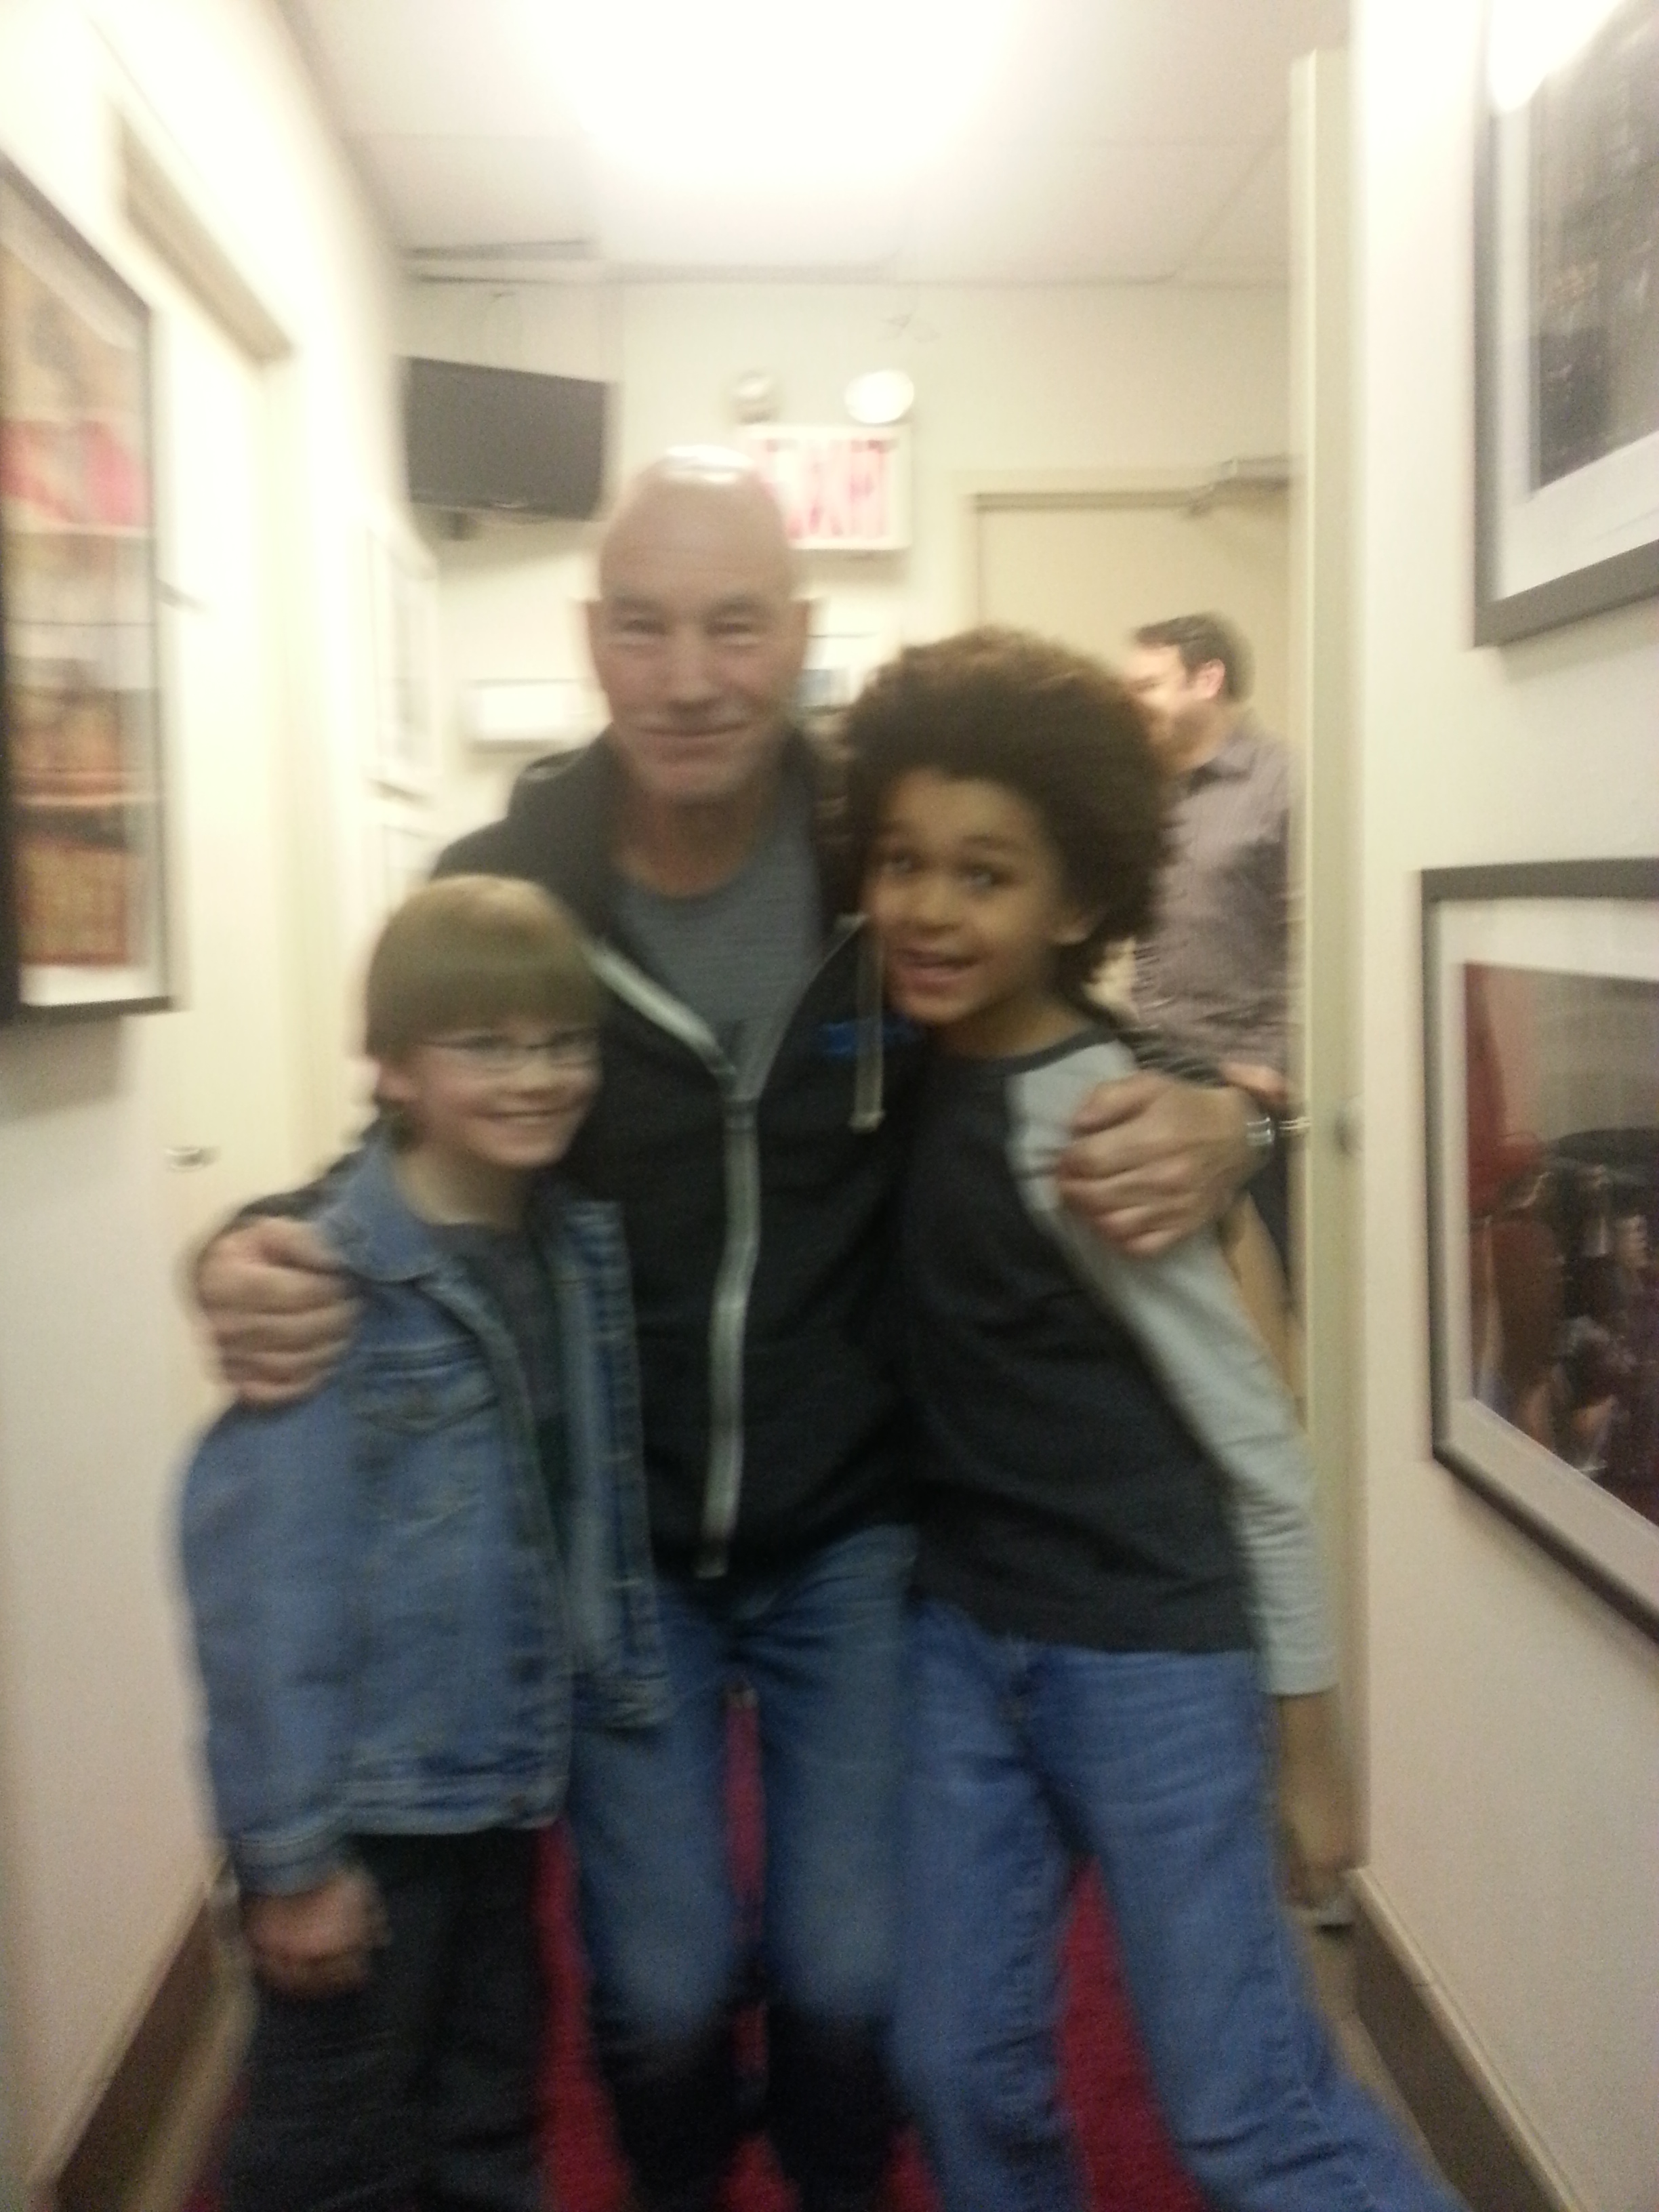 Patrick Stewart with the boys on THE COLBERT REPORT